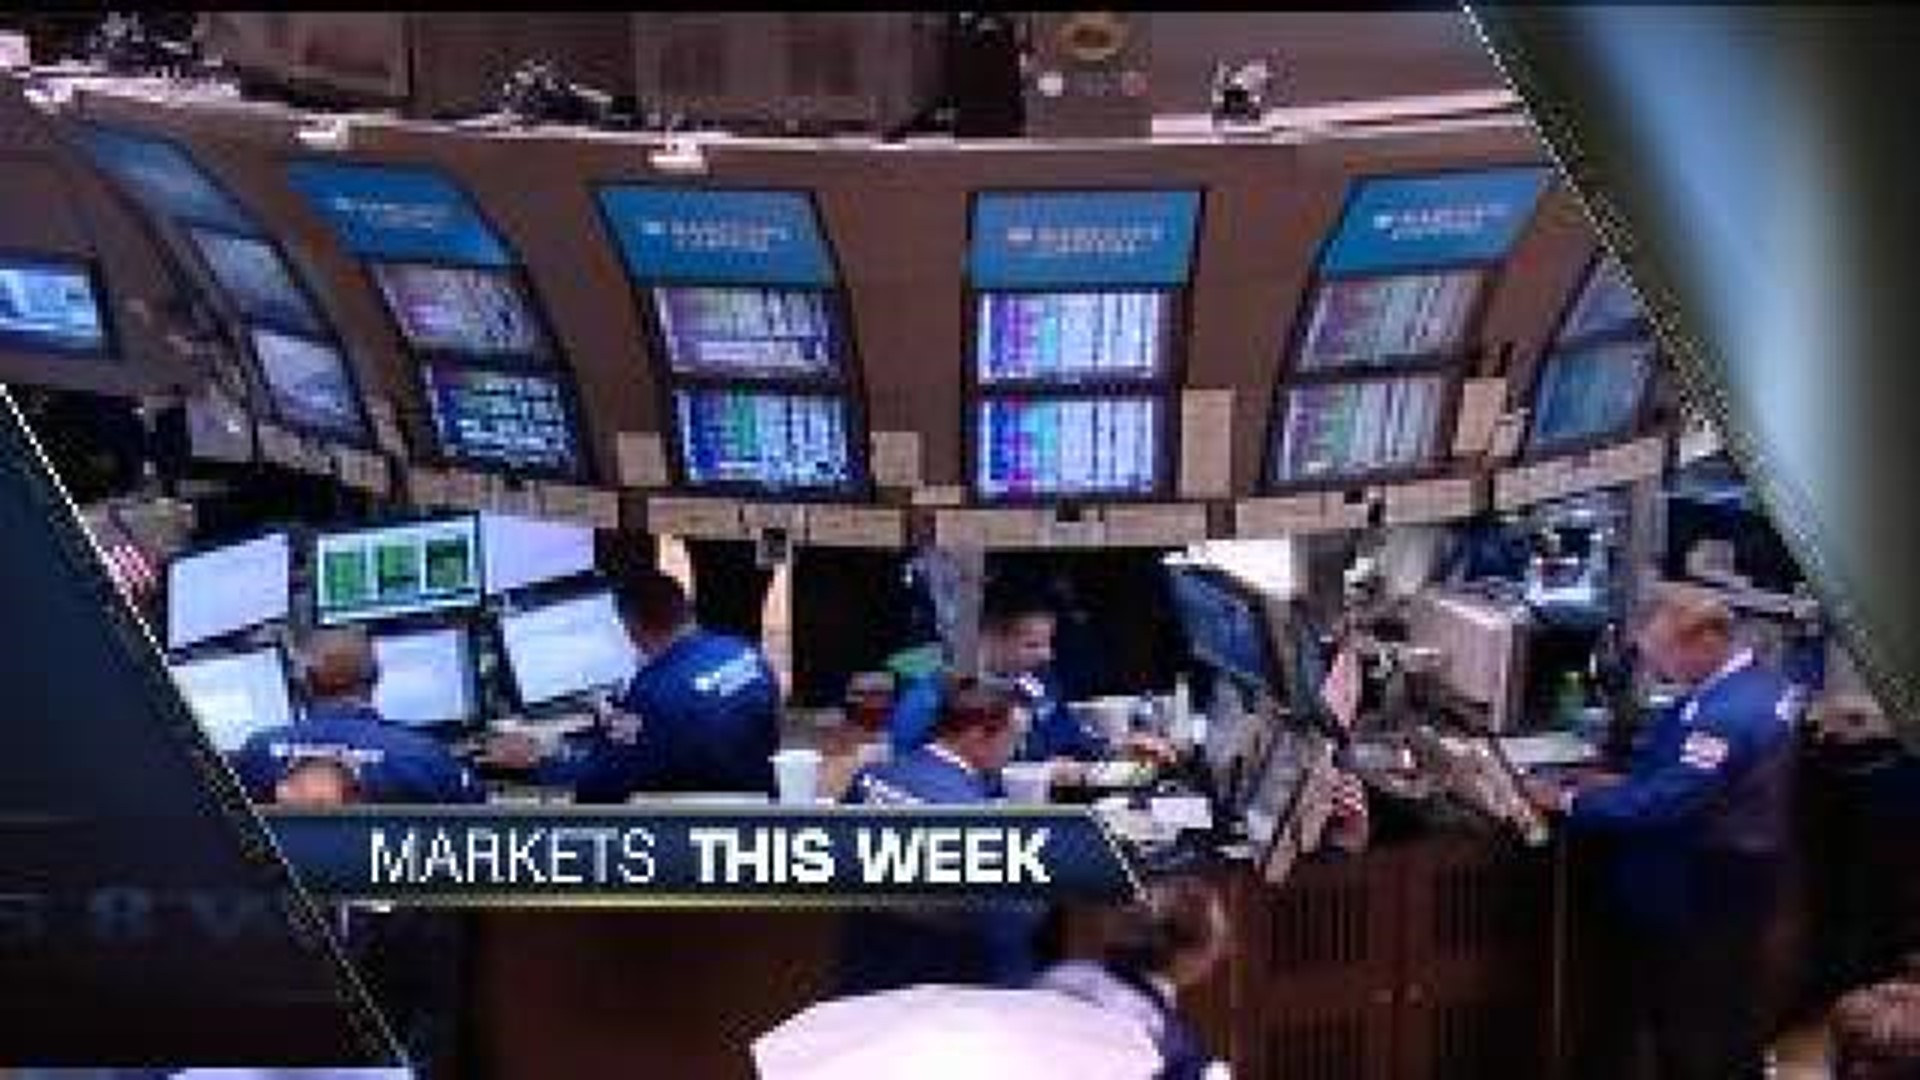 Phil Kassewitz: Markets Poised for Gains